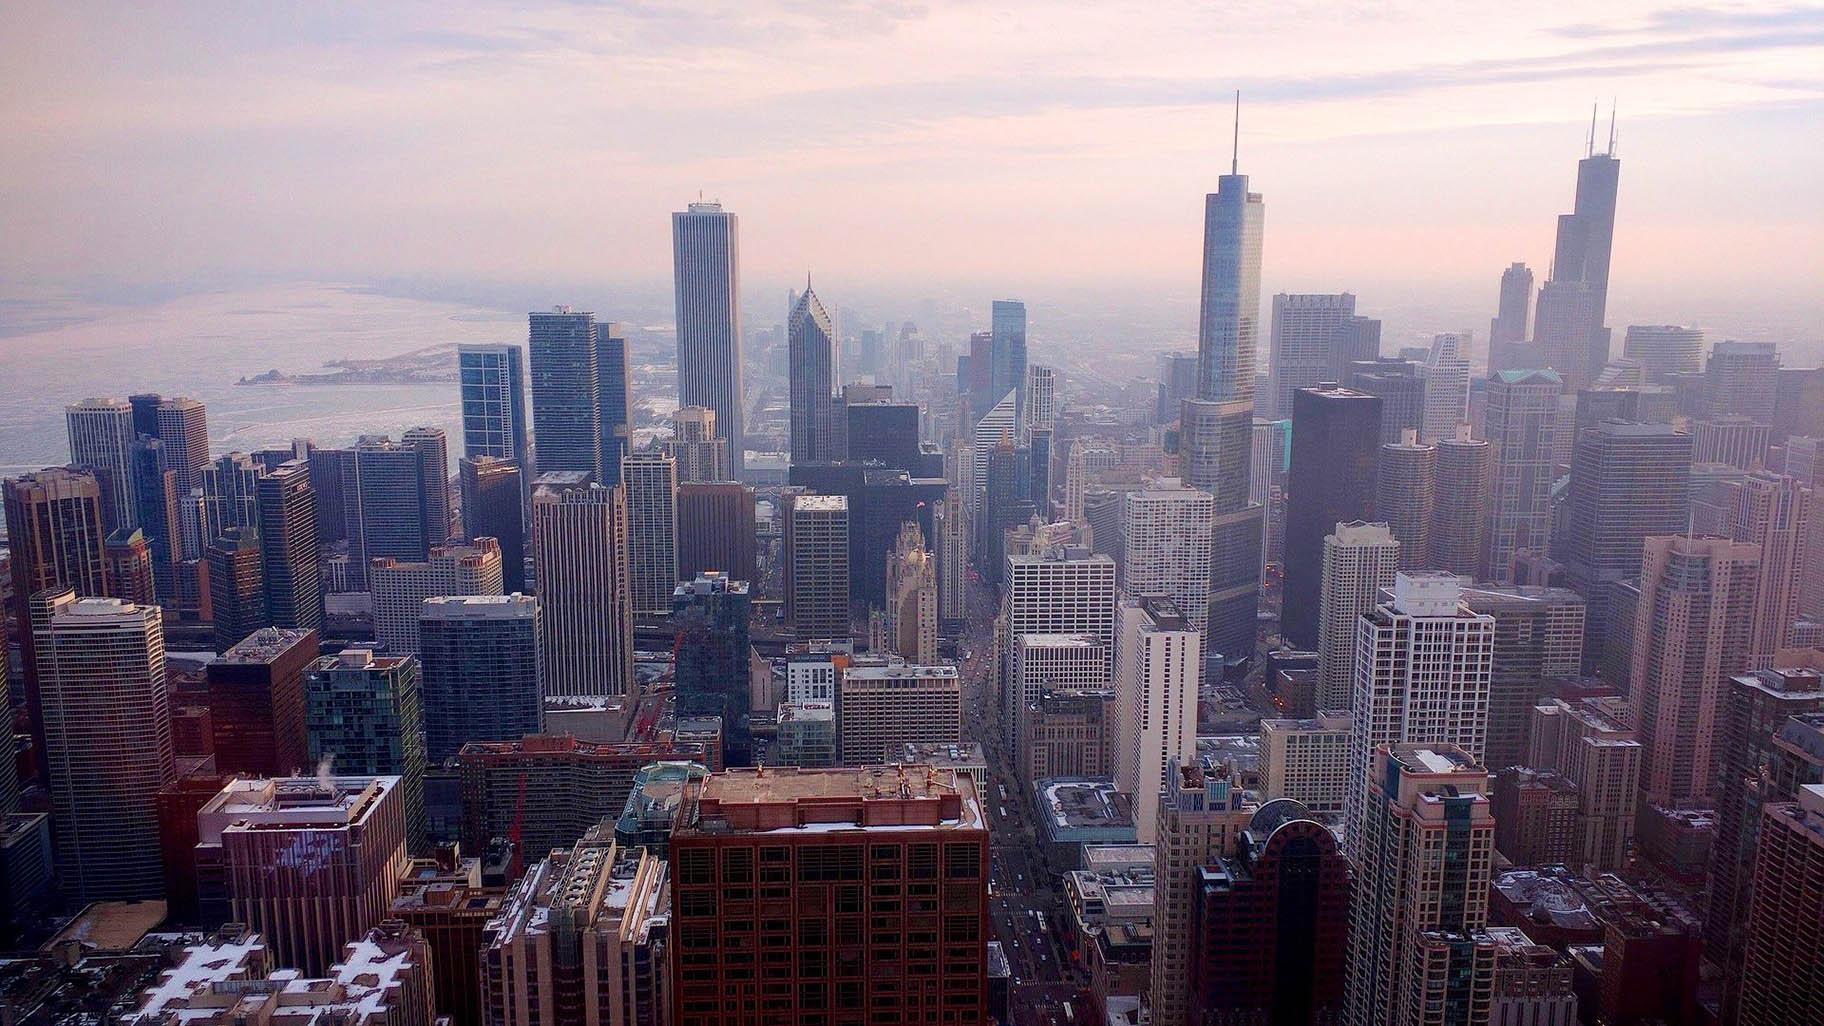 Chicago set a number of weather records in 2020. (Adonis Villanueva / Pixabay)